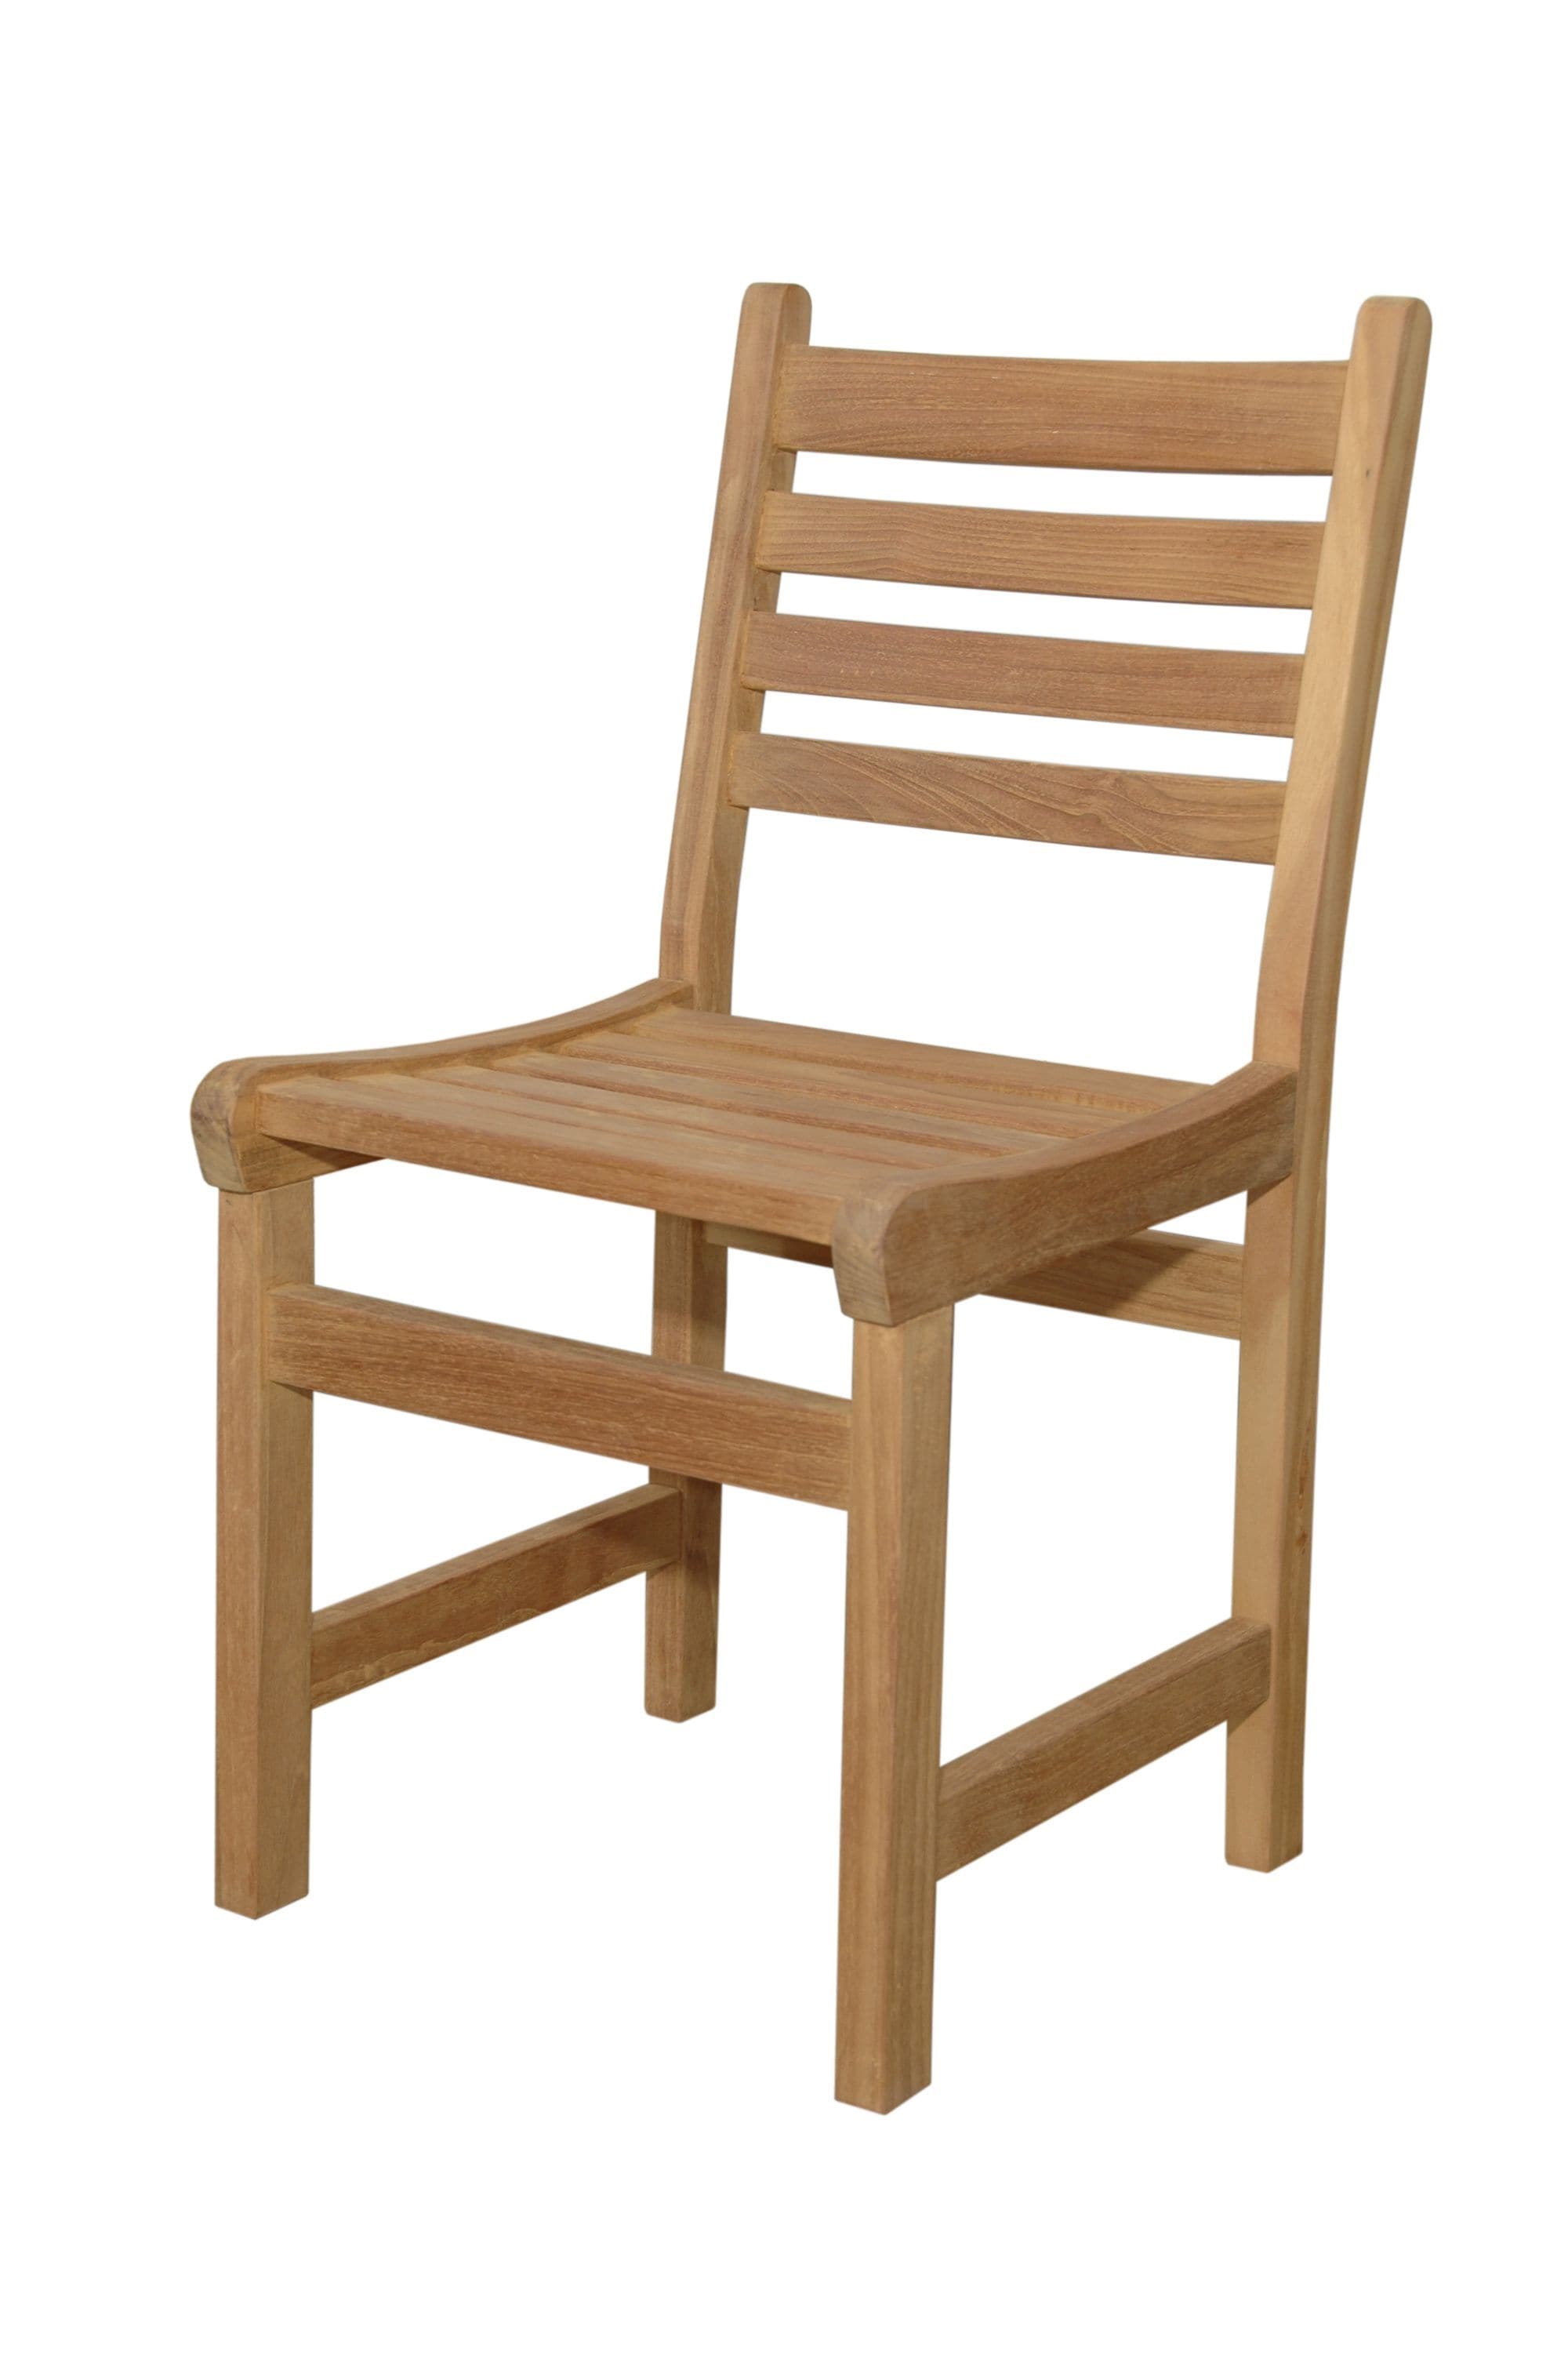 Anderson Teak Outdoor Dining Chairs Anderson Teak Windham Dining Chair